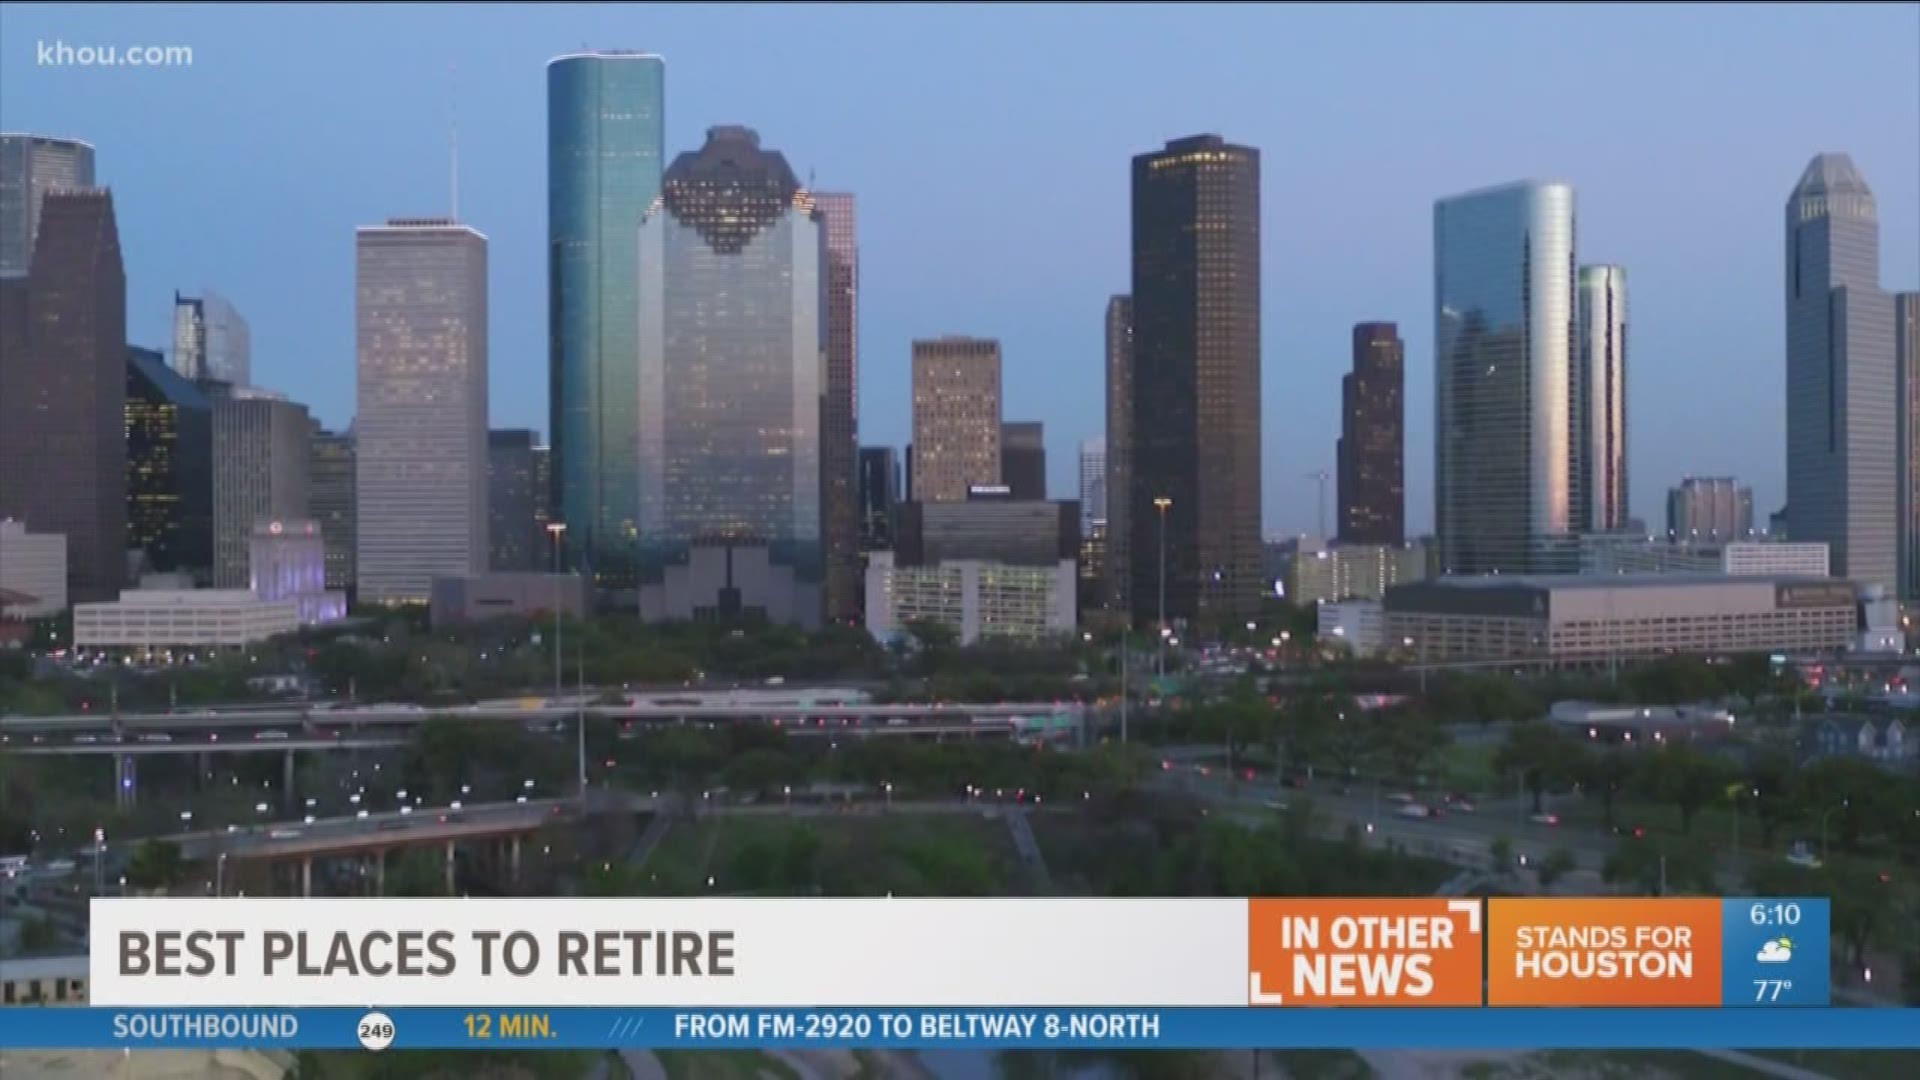 Best places to retire? Texas barely breaks Top 20